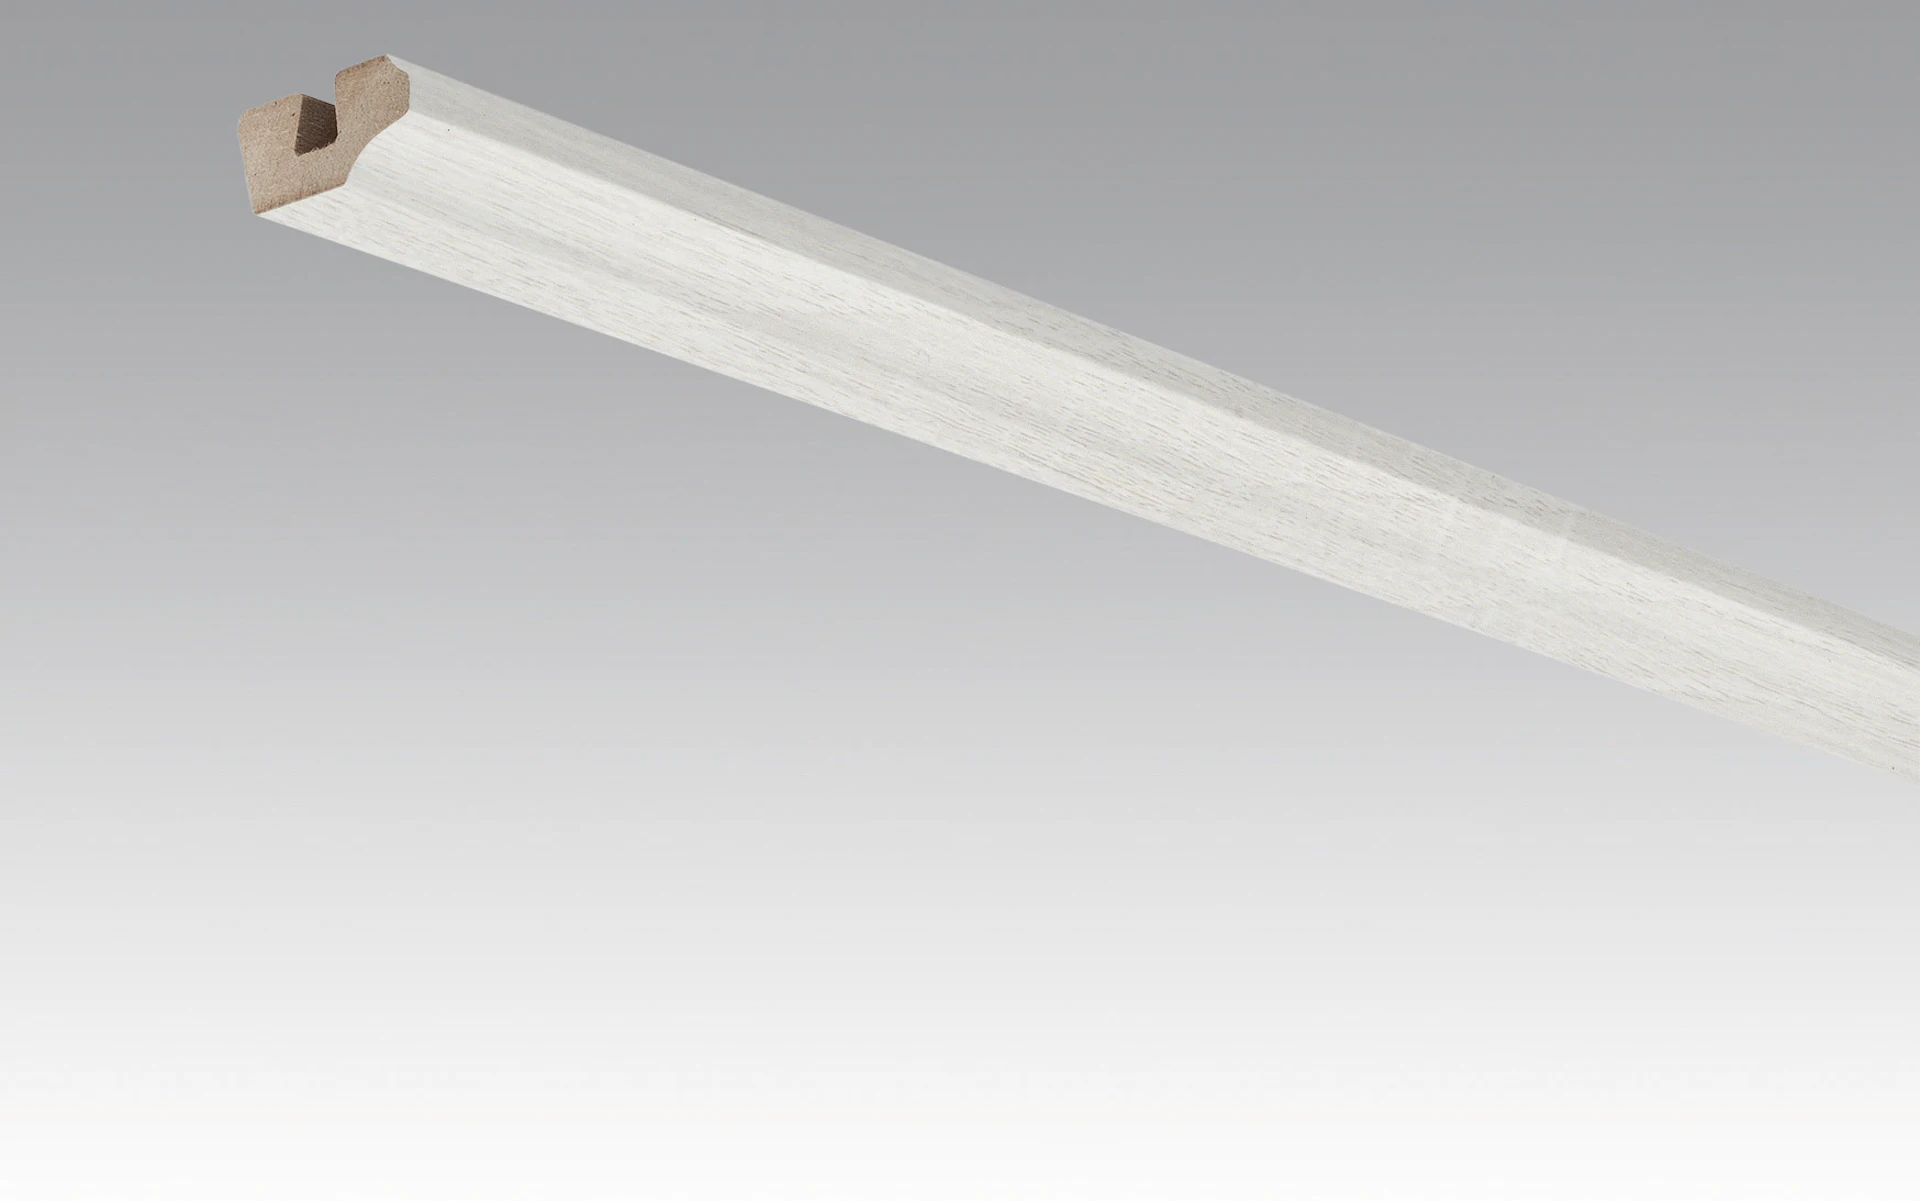 MEISTER skirting boards ceiling trims oak white opaque 4069 - 2380 x 38 x 19 mm (200031-2380-04069)